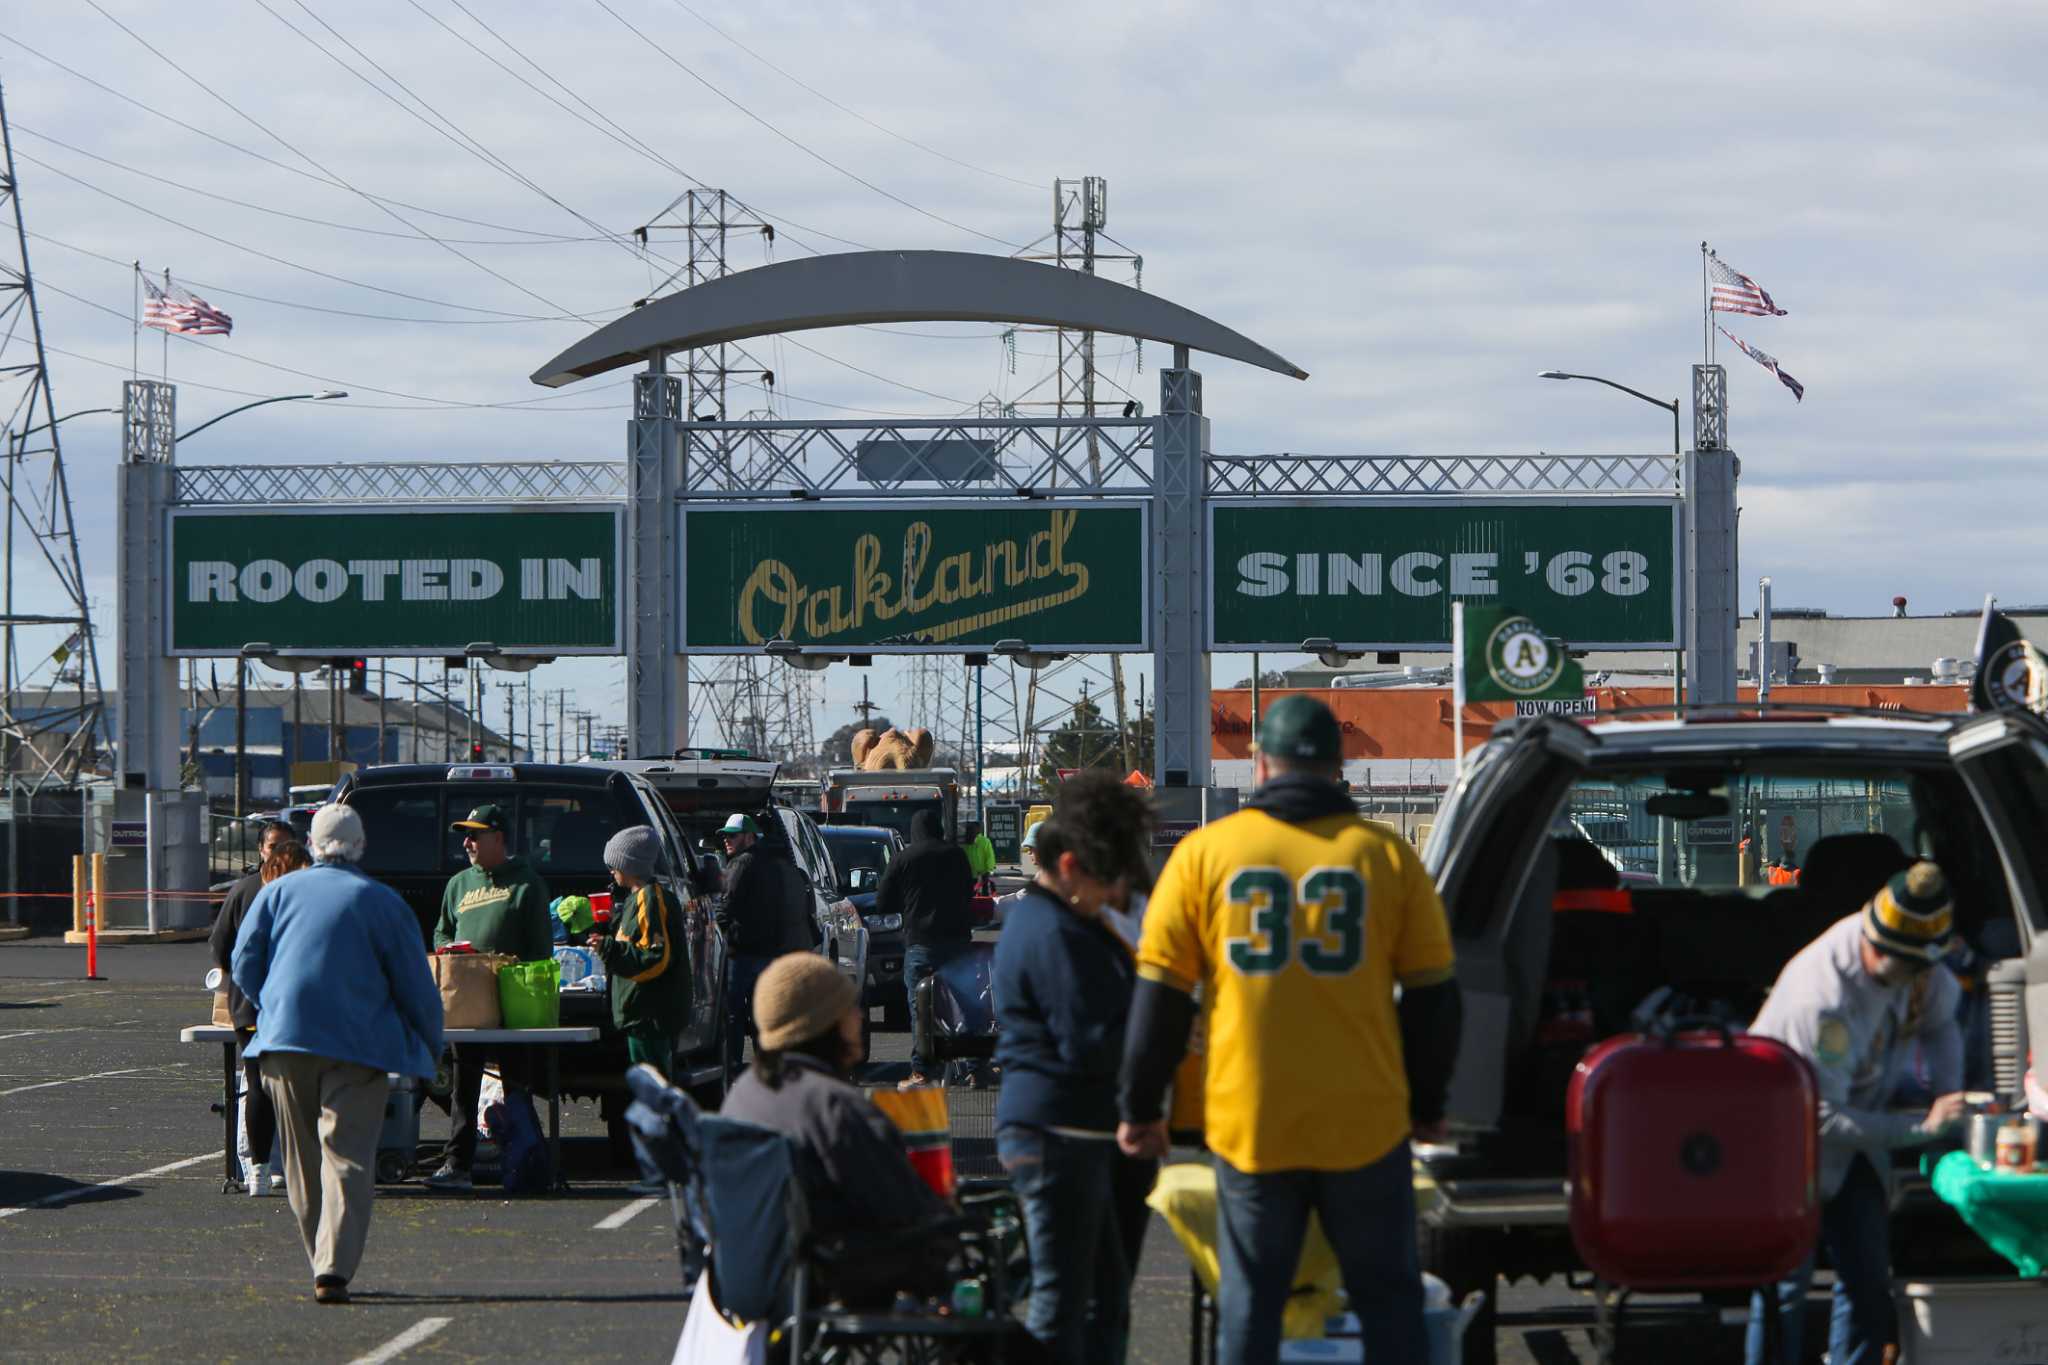 Oakland A’s are moving to Las Vegas. Good luck finding new fans